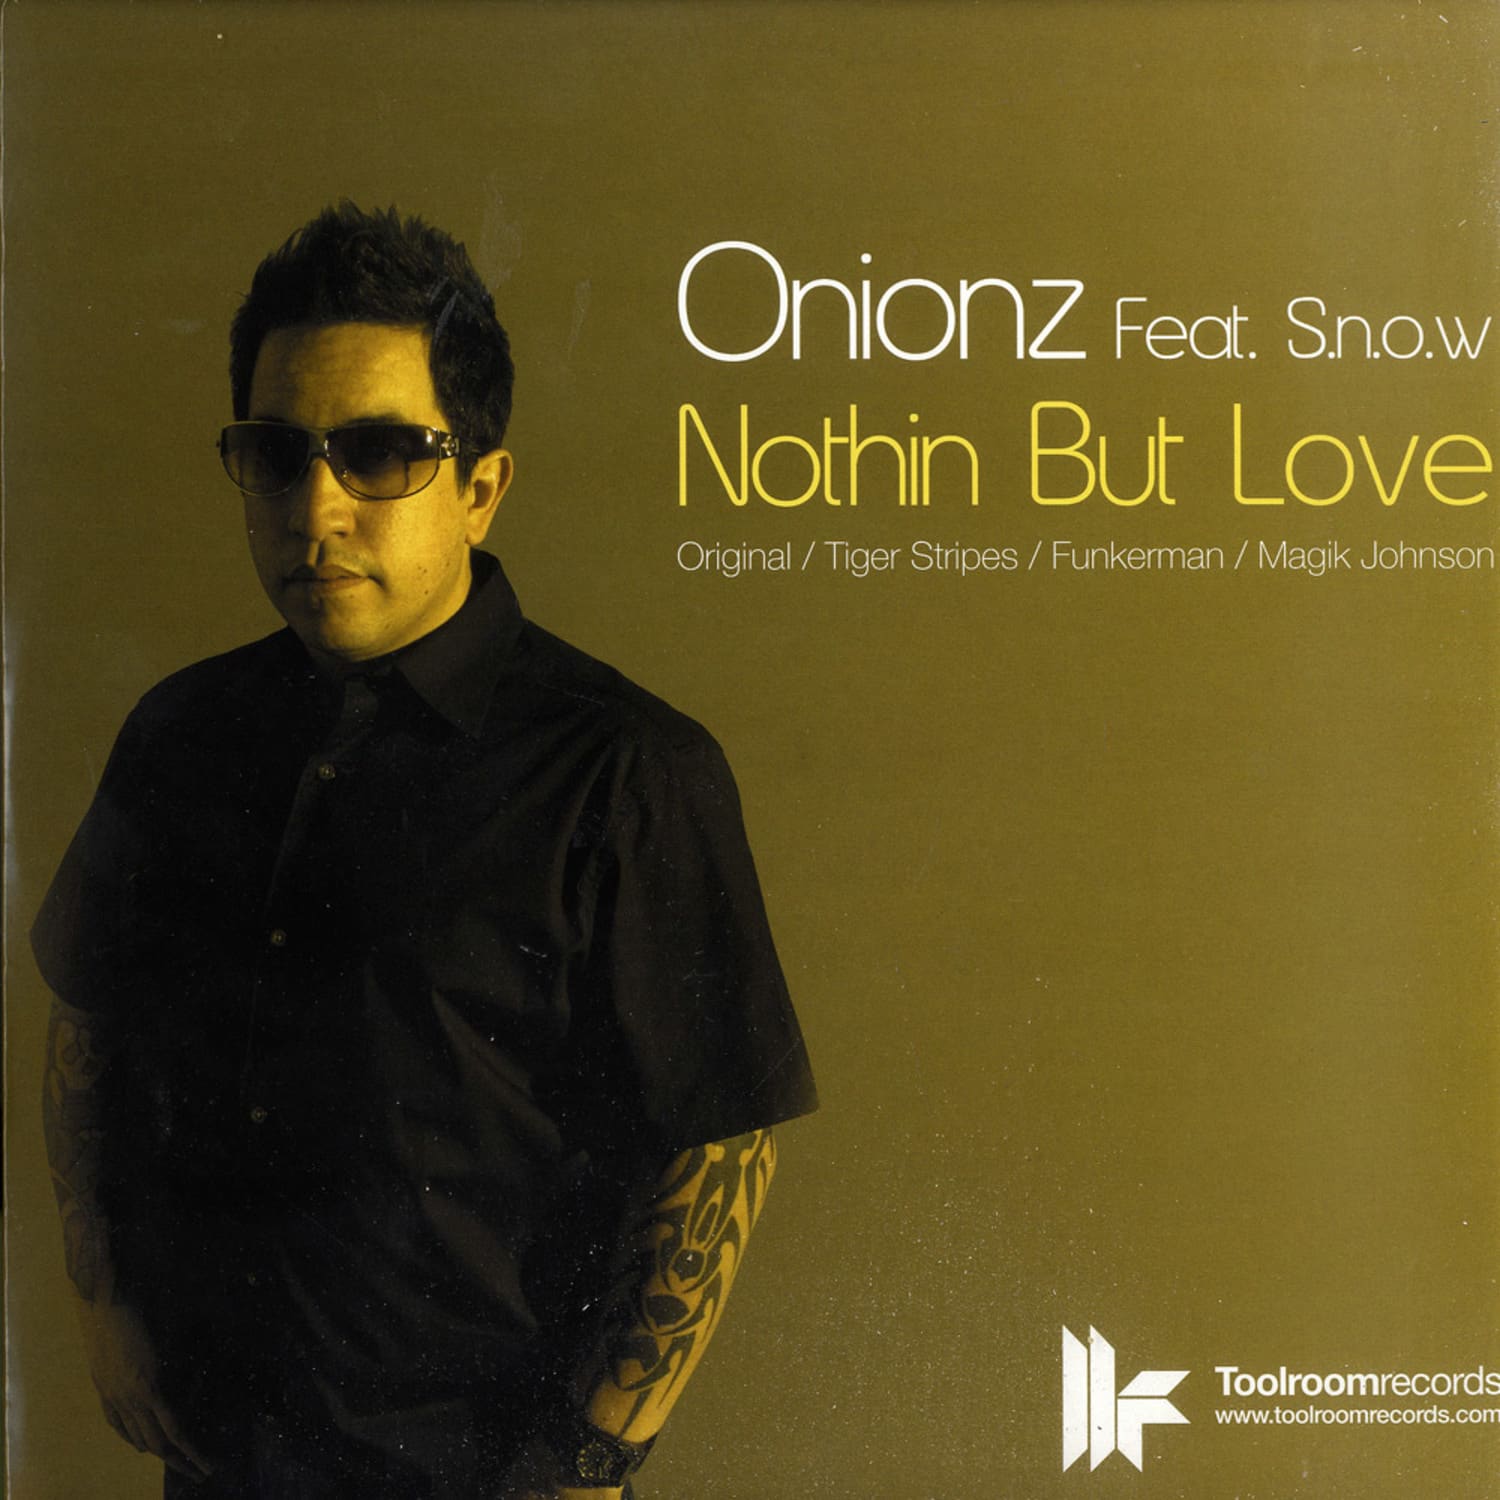 Onionz feat. S.n.o.w - NOTHING BUT LOVE